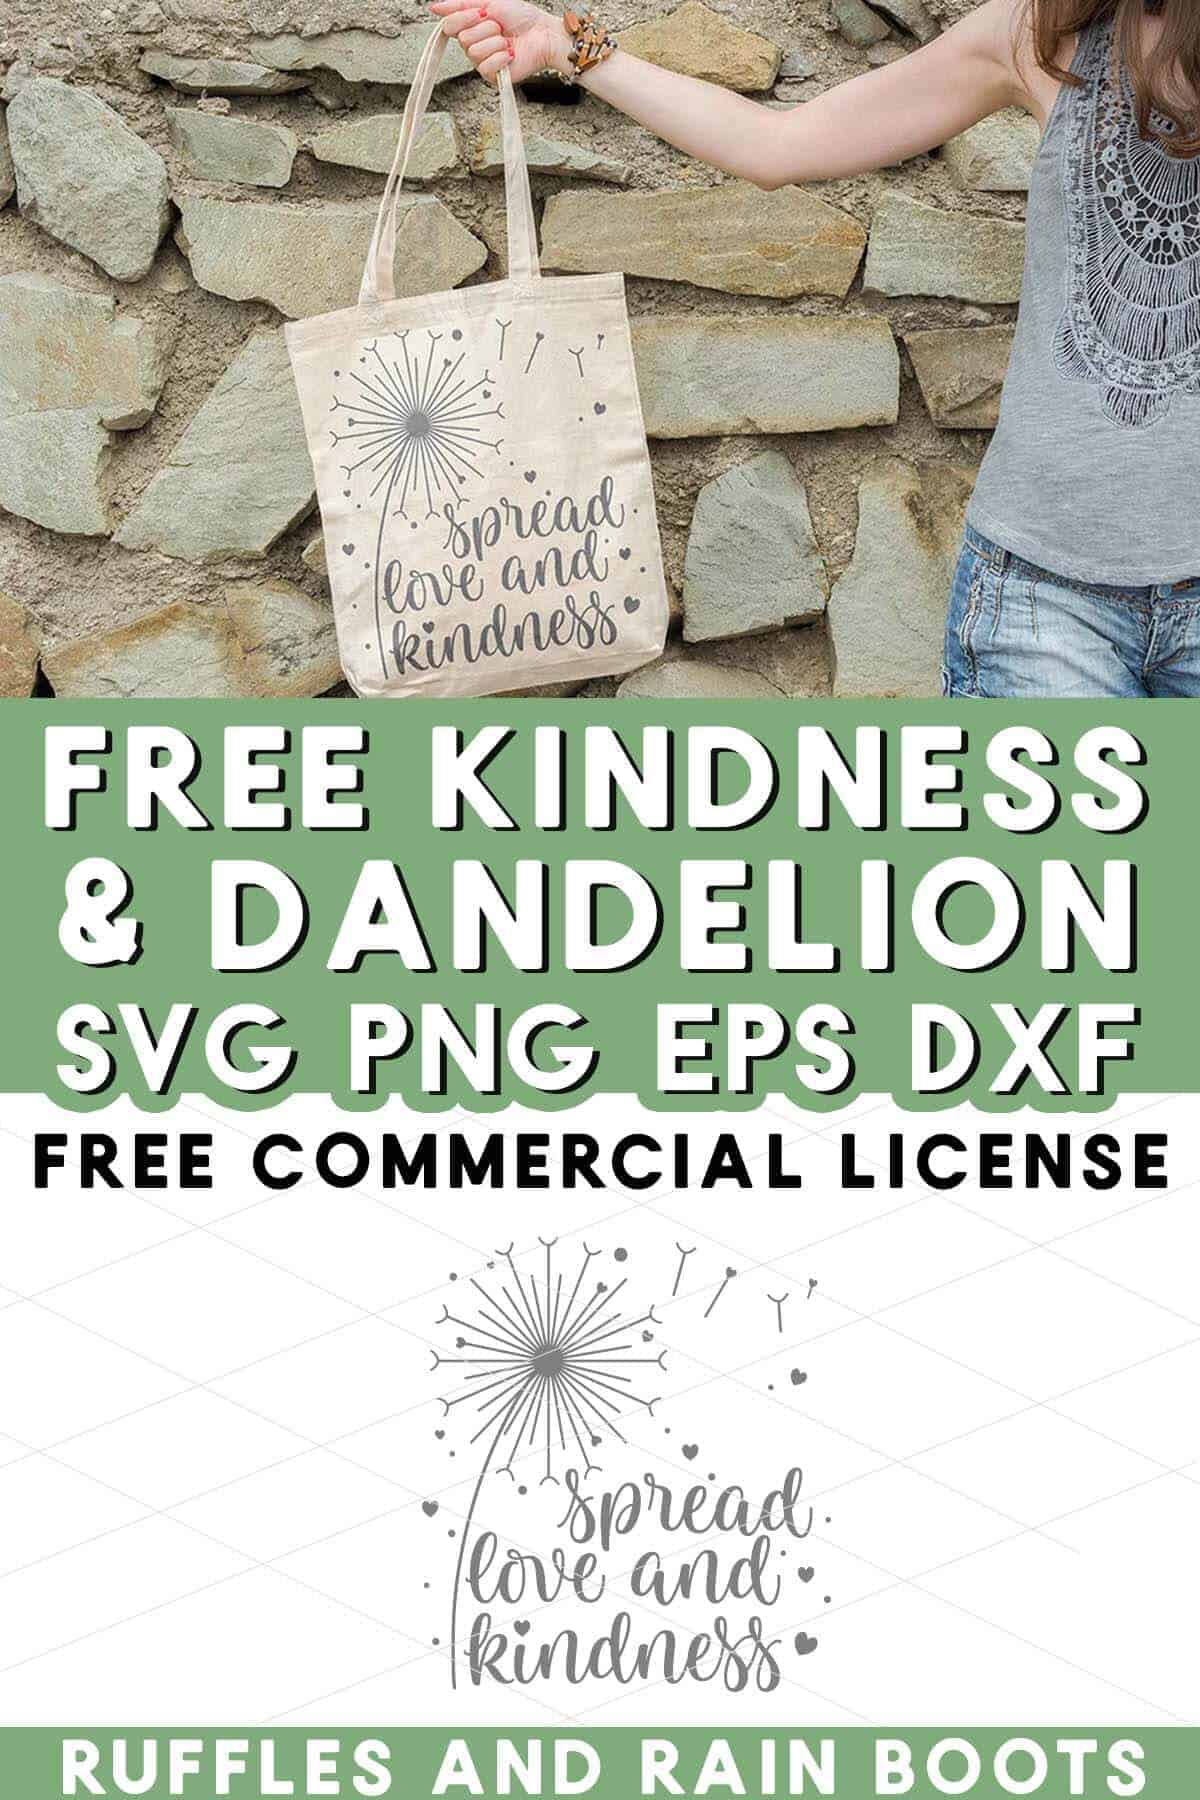 Stacked vertical image of a stone wall and a woman holding a tote bag with free dandelion SVG and spread love and kindness message.